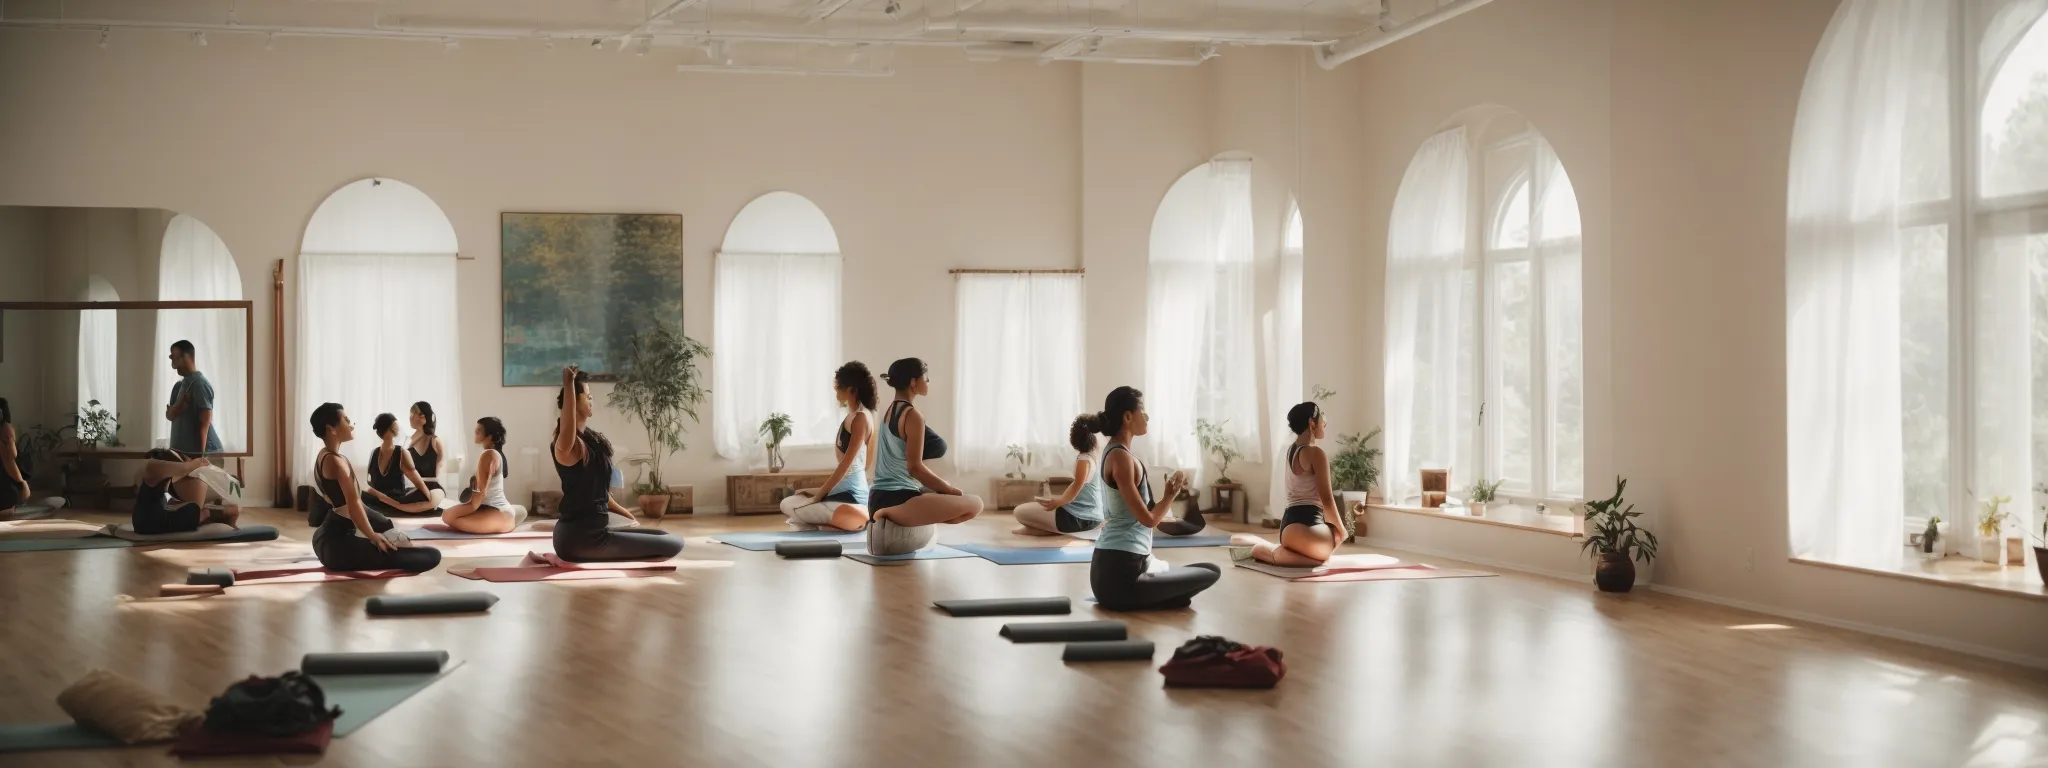 a serene yoga studio filled with natural light where a group of peaceful practitioners engage in a harmonious morning session.